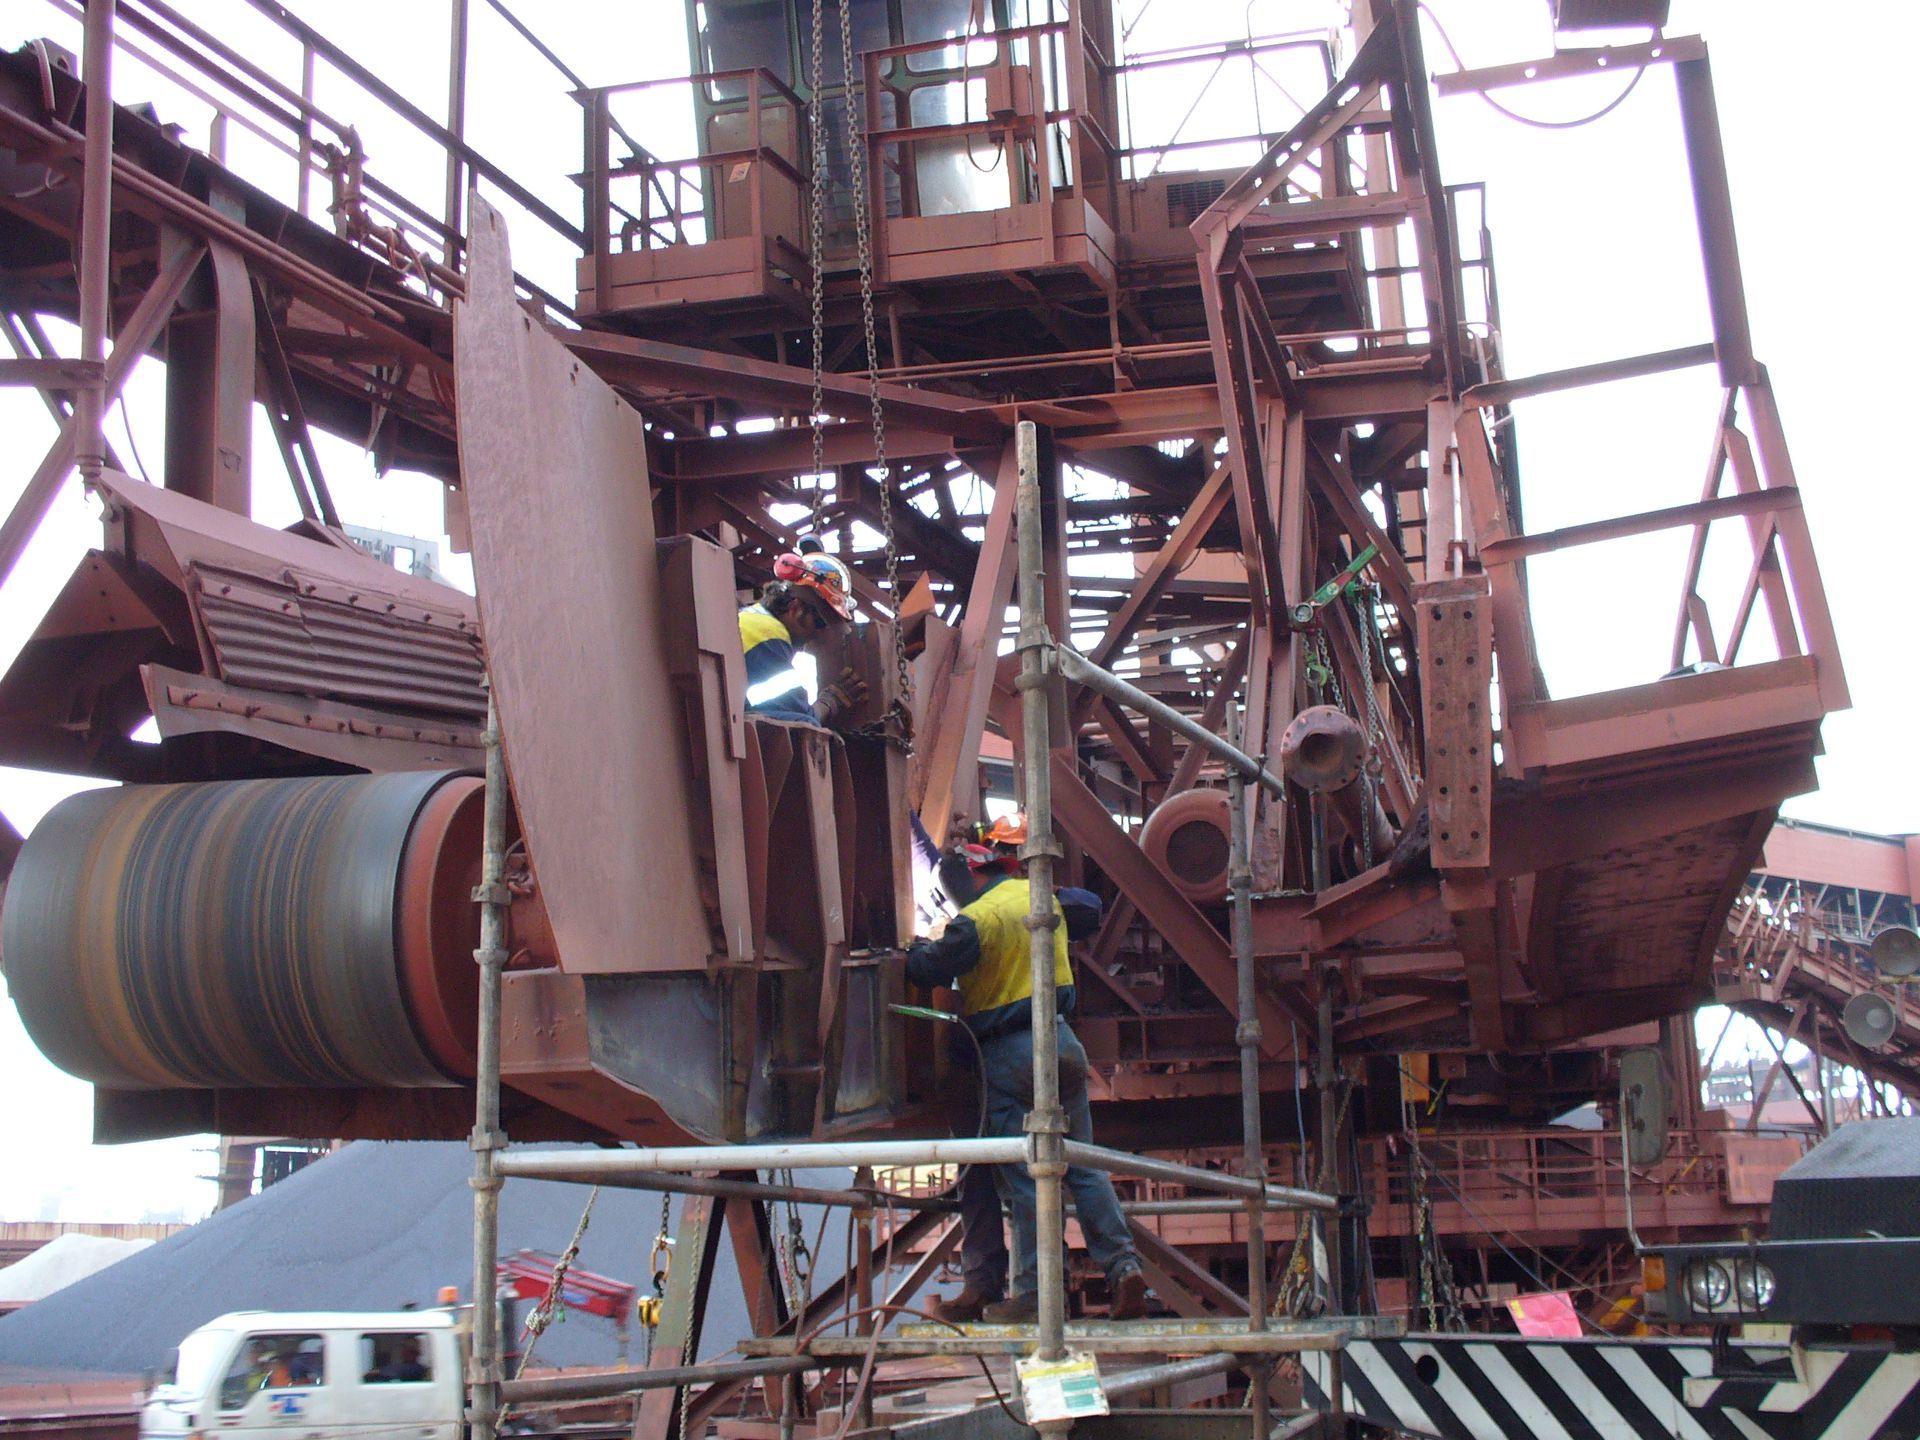 a man in a yellow shirt is working on a large metal structure